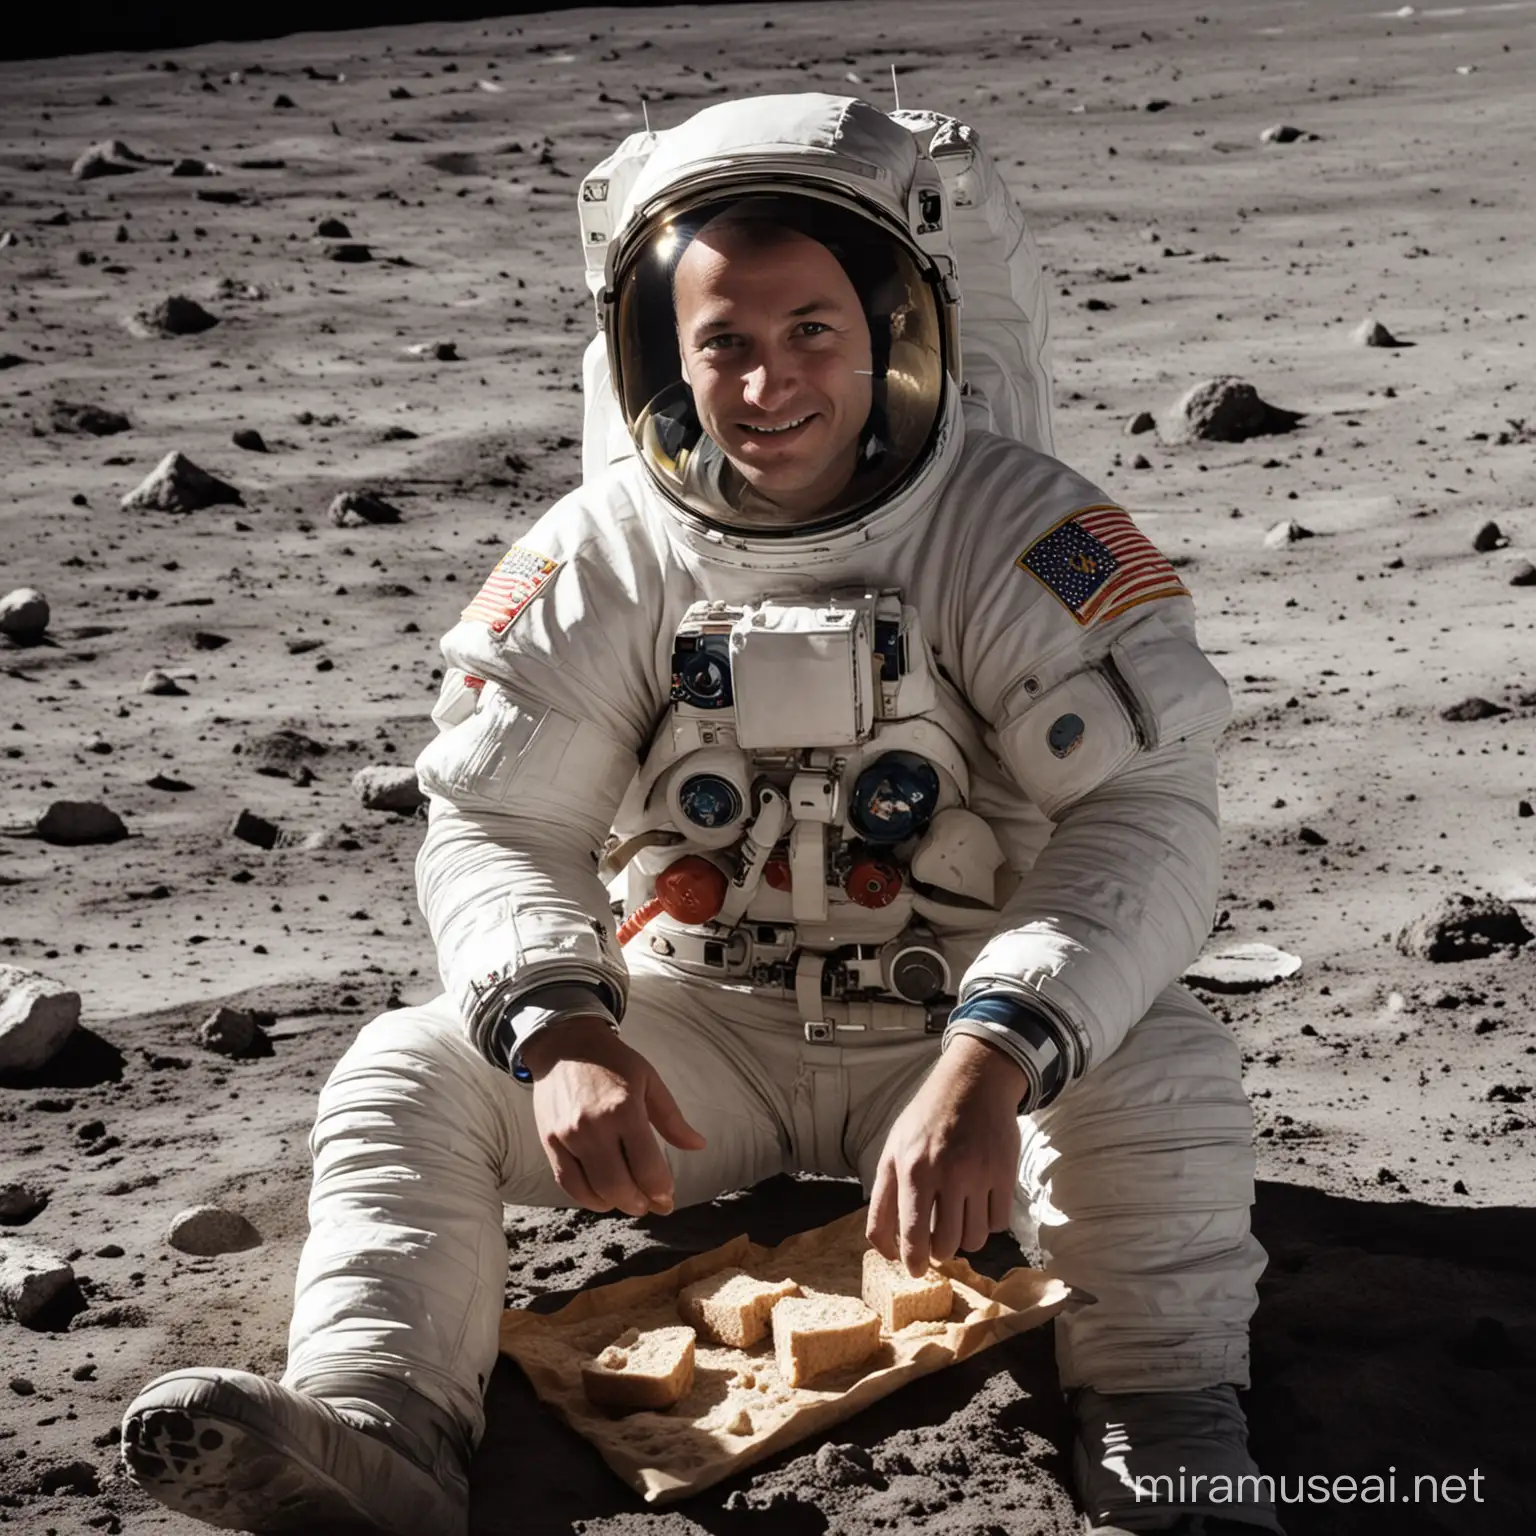 Astronauts Enjoy Lunar Picnic with Bread and Meat